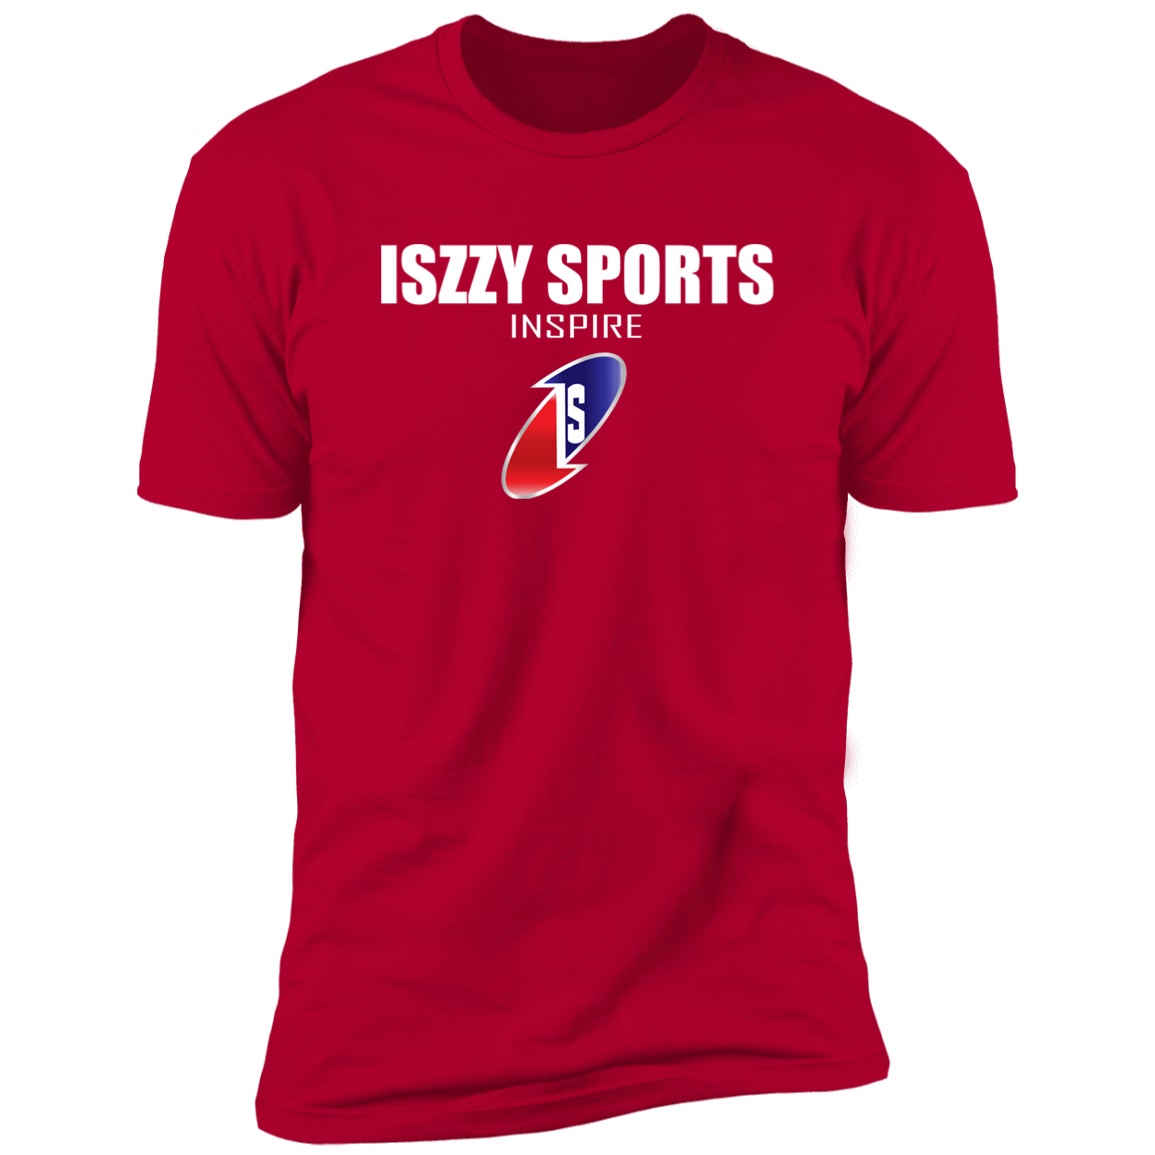 Iszzy Sports shirt (Inspire)